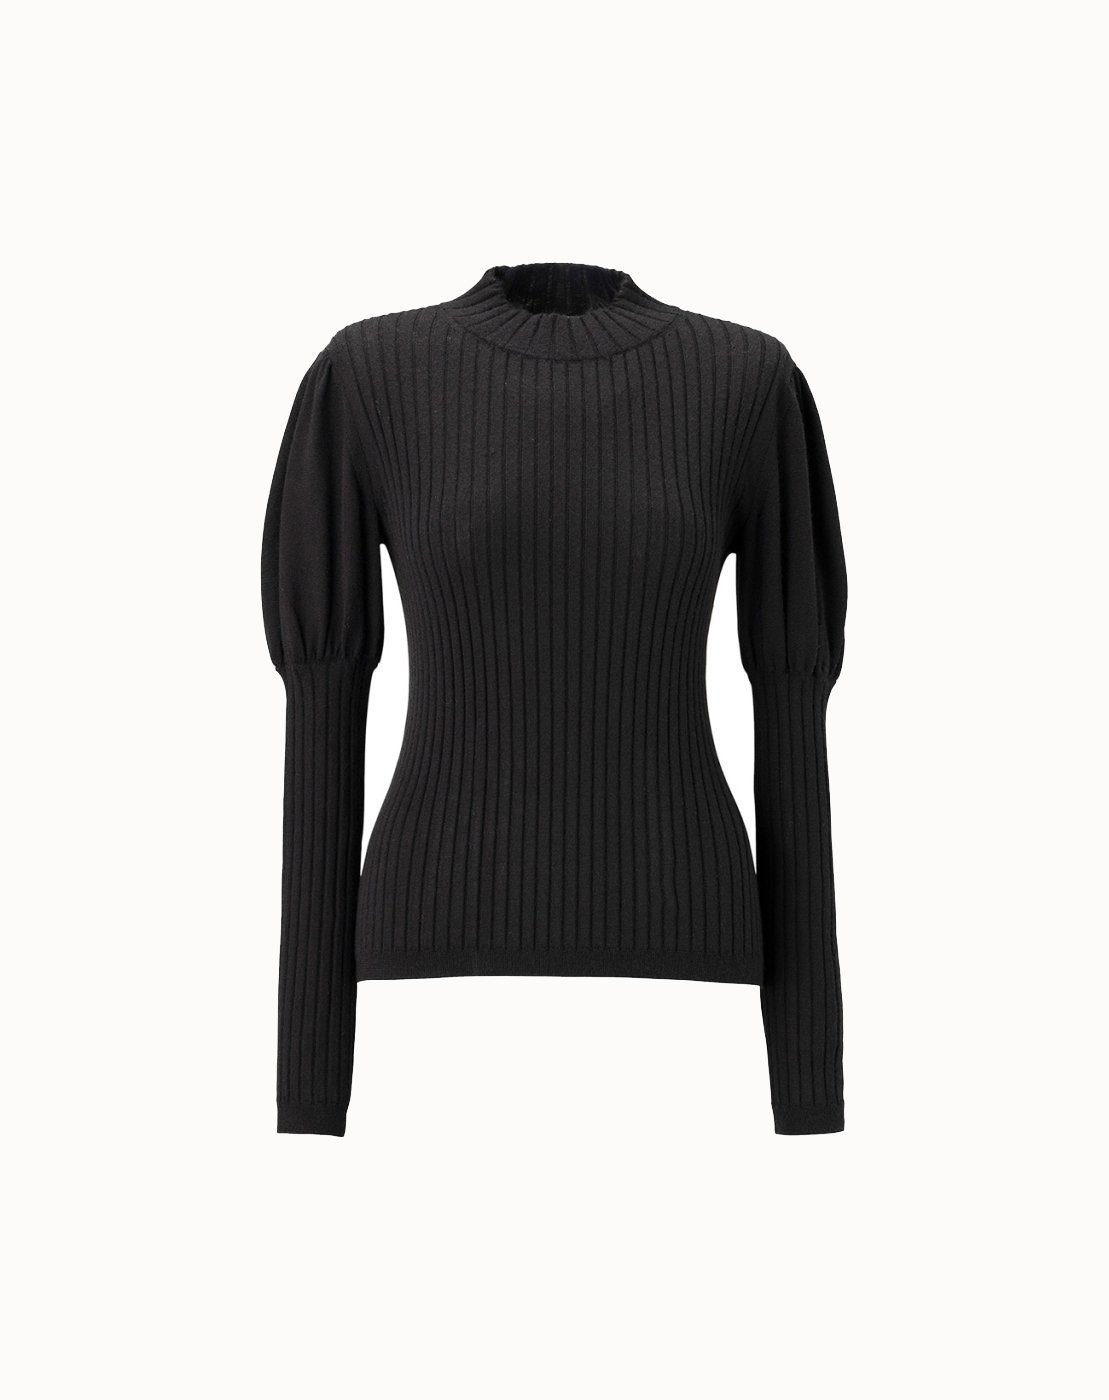 leur logette - <img class='new_mark_img1' src='https://img.shop-pro.jp/img/new/icons1.gif' style='border:none;display:inline;margin:0px;padding:0px;width:auto;' />Cashmere Silk Rib Top - Black